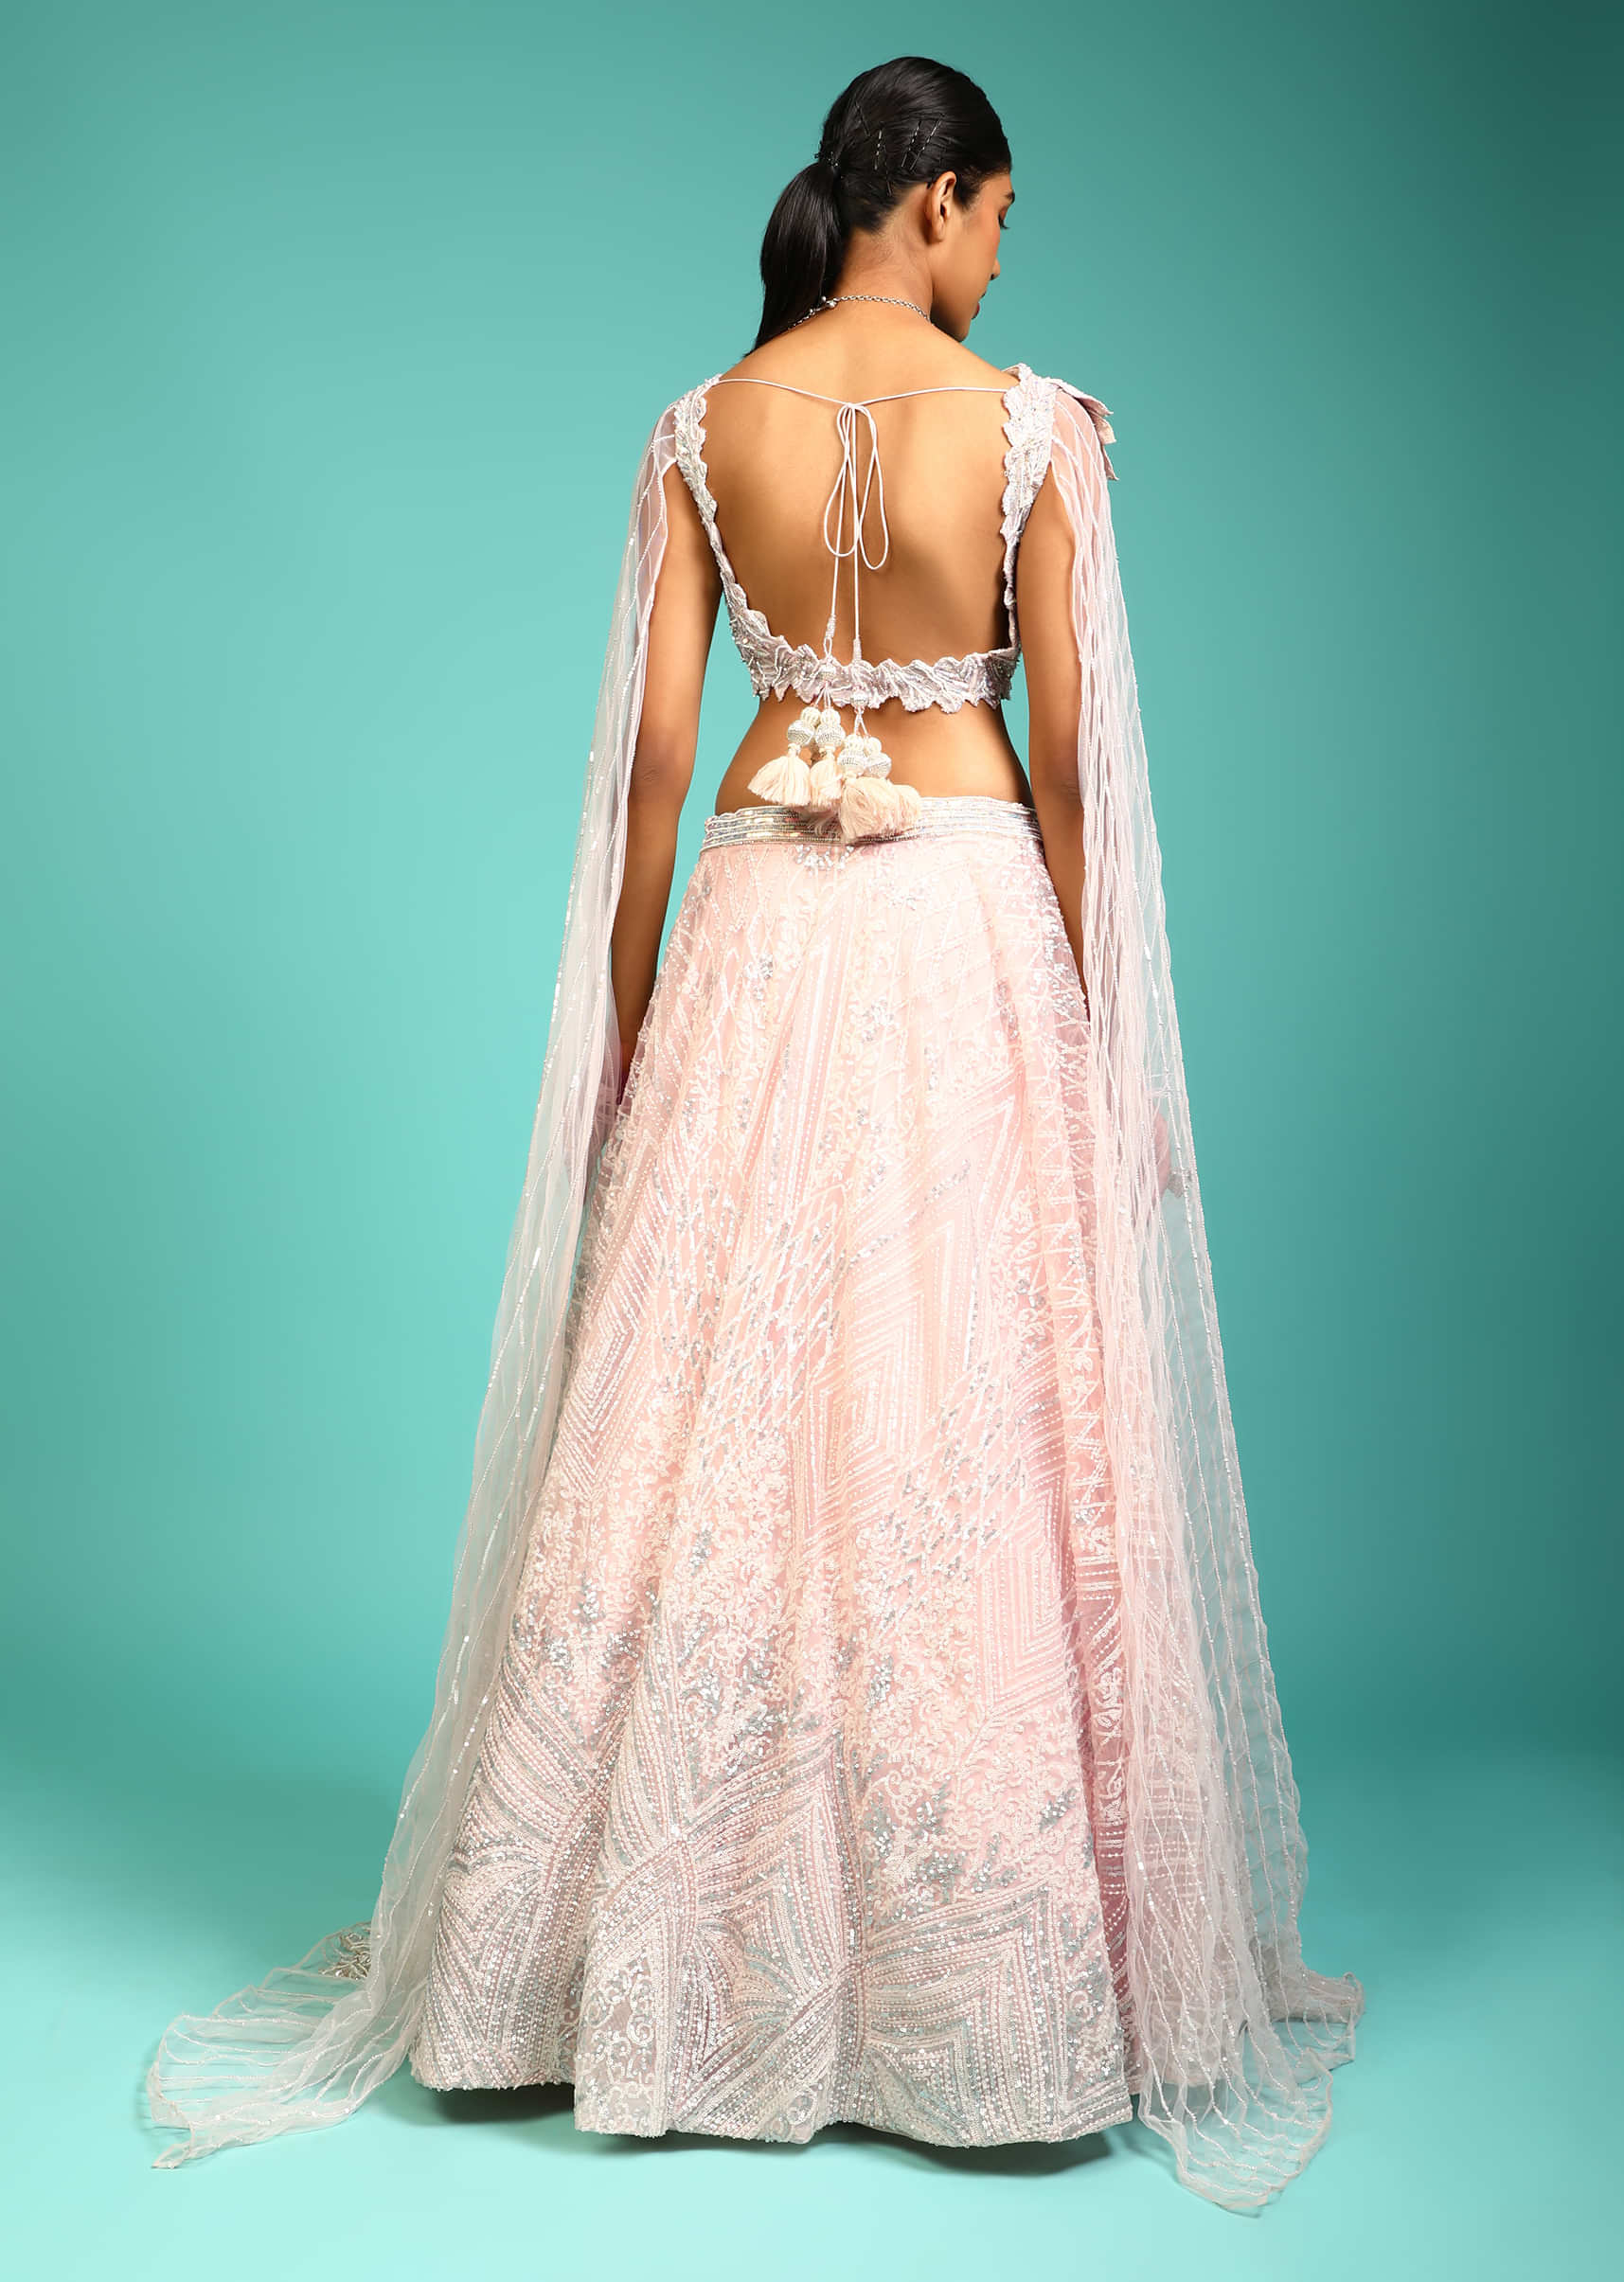 Baby Pink Lehenga Choli With Sequins Embroidered 3D Patch On The Shoulder And Long Floor Length Sleeves 